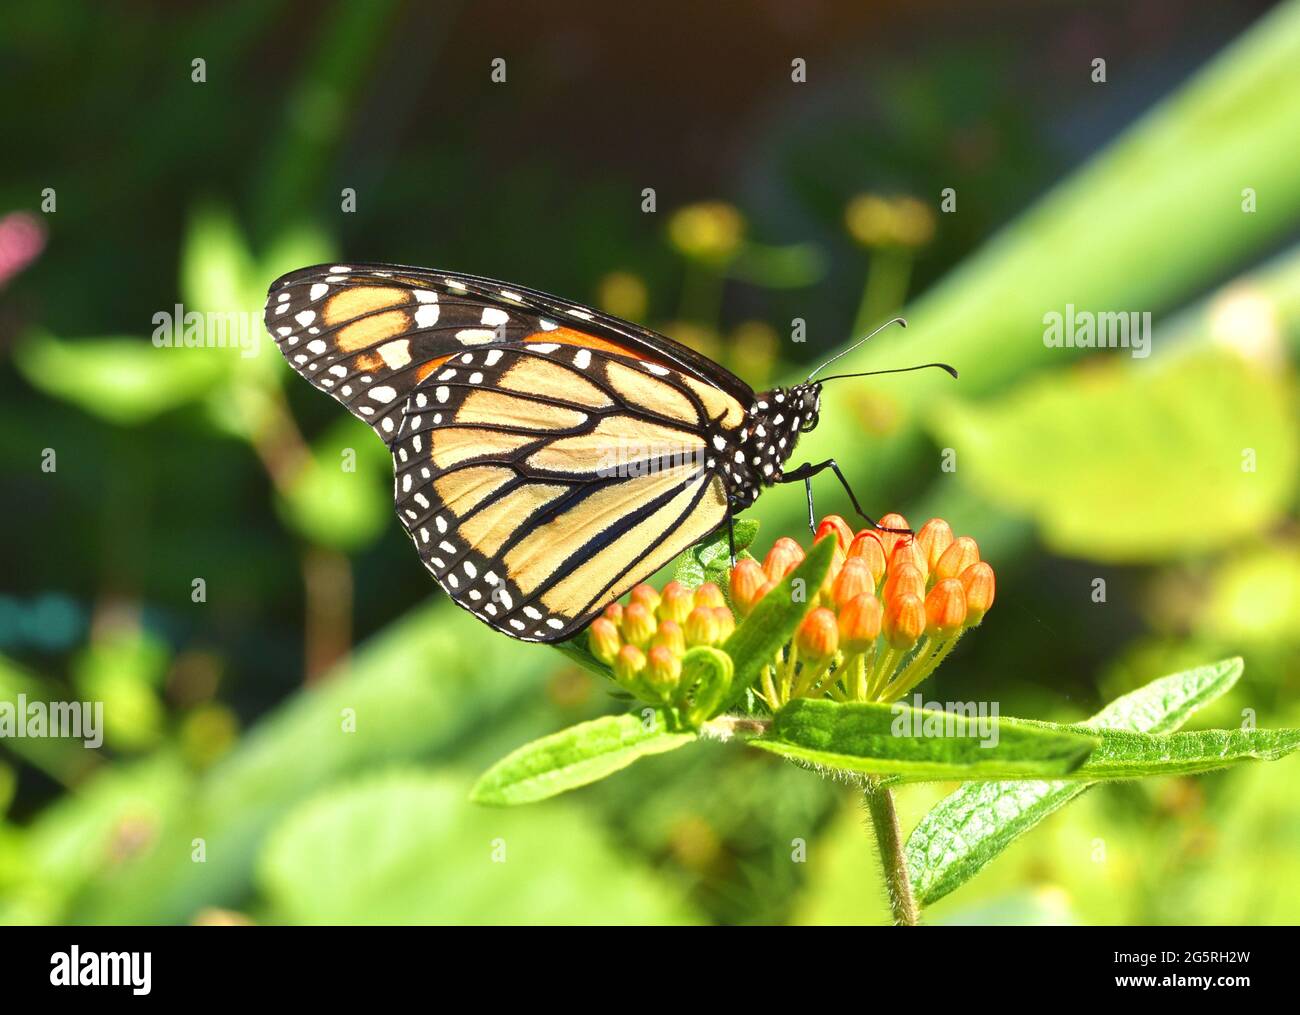 A Monarch Butterfly (Danaus plexippus) resting on the orange flower buds of Butterfly weed (Asclepias tuberosa). Copy space. Closeup. Stock Photo